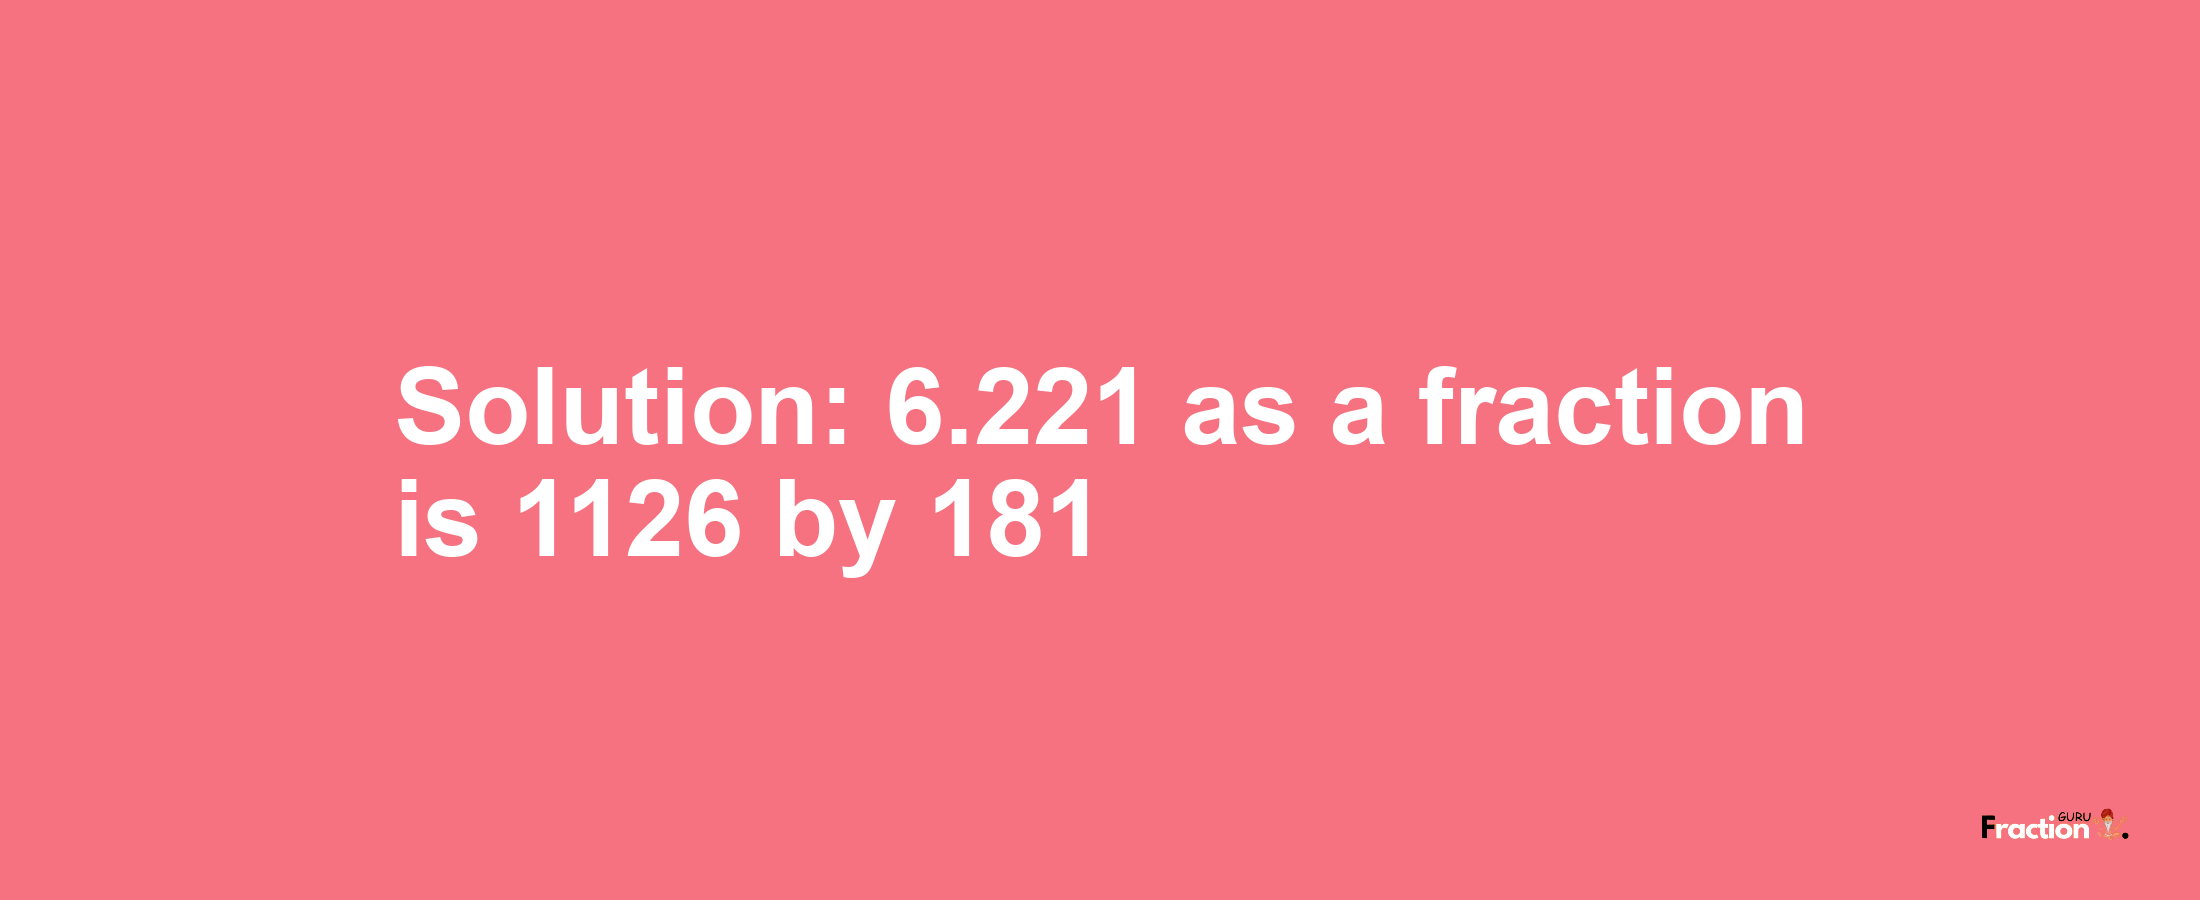 Solution:6.221 as a fraction is 1126/181